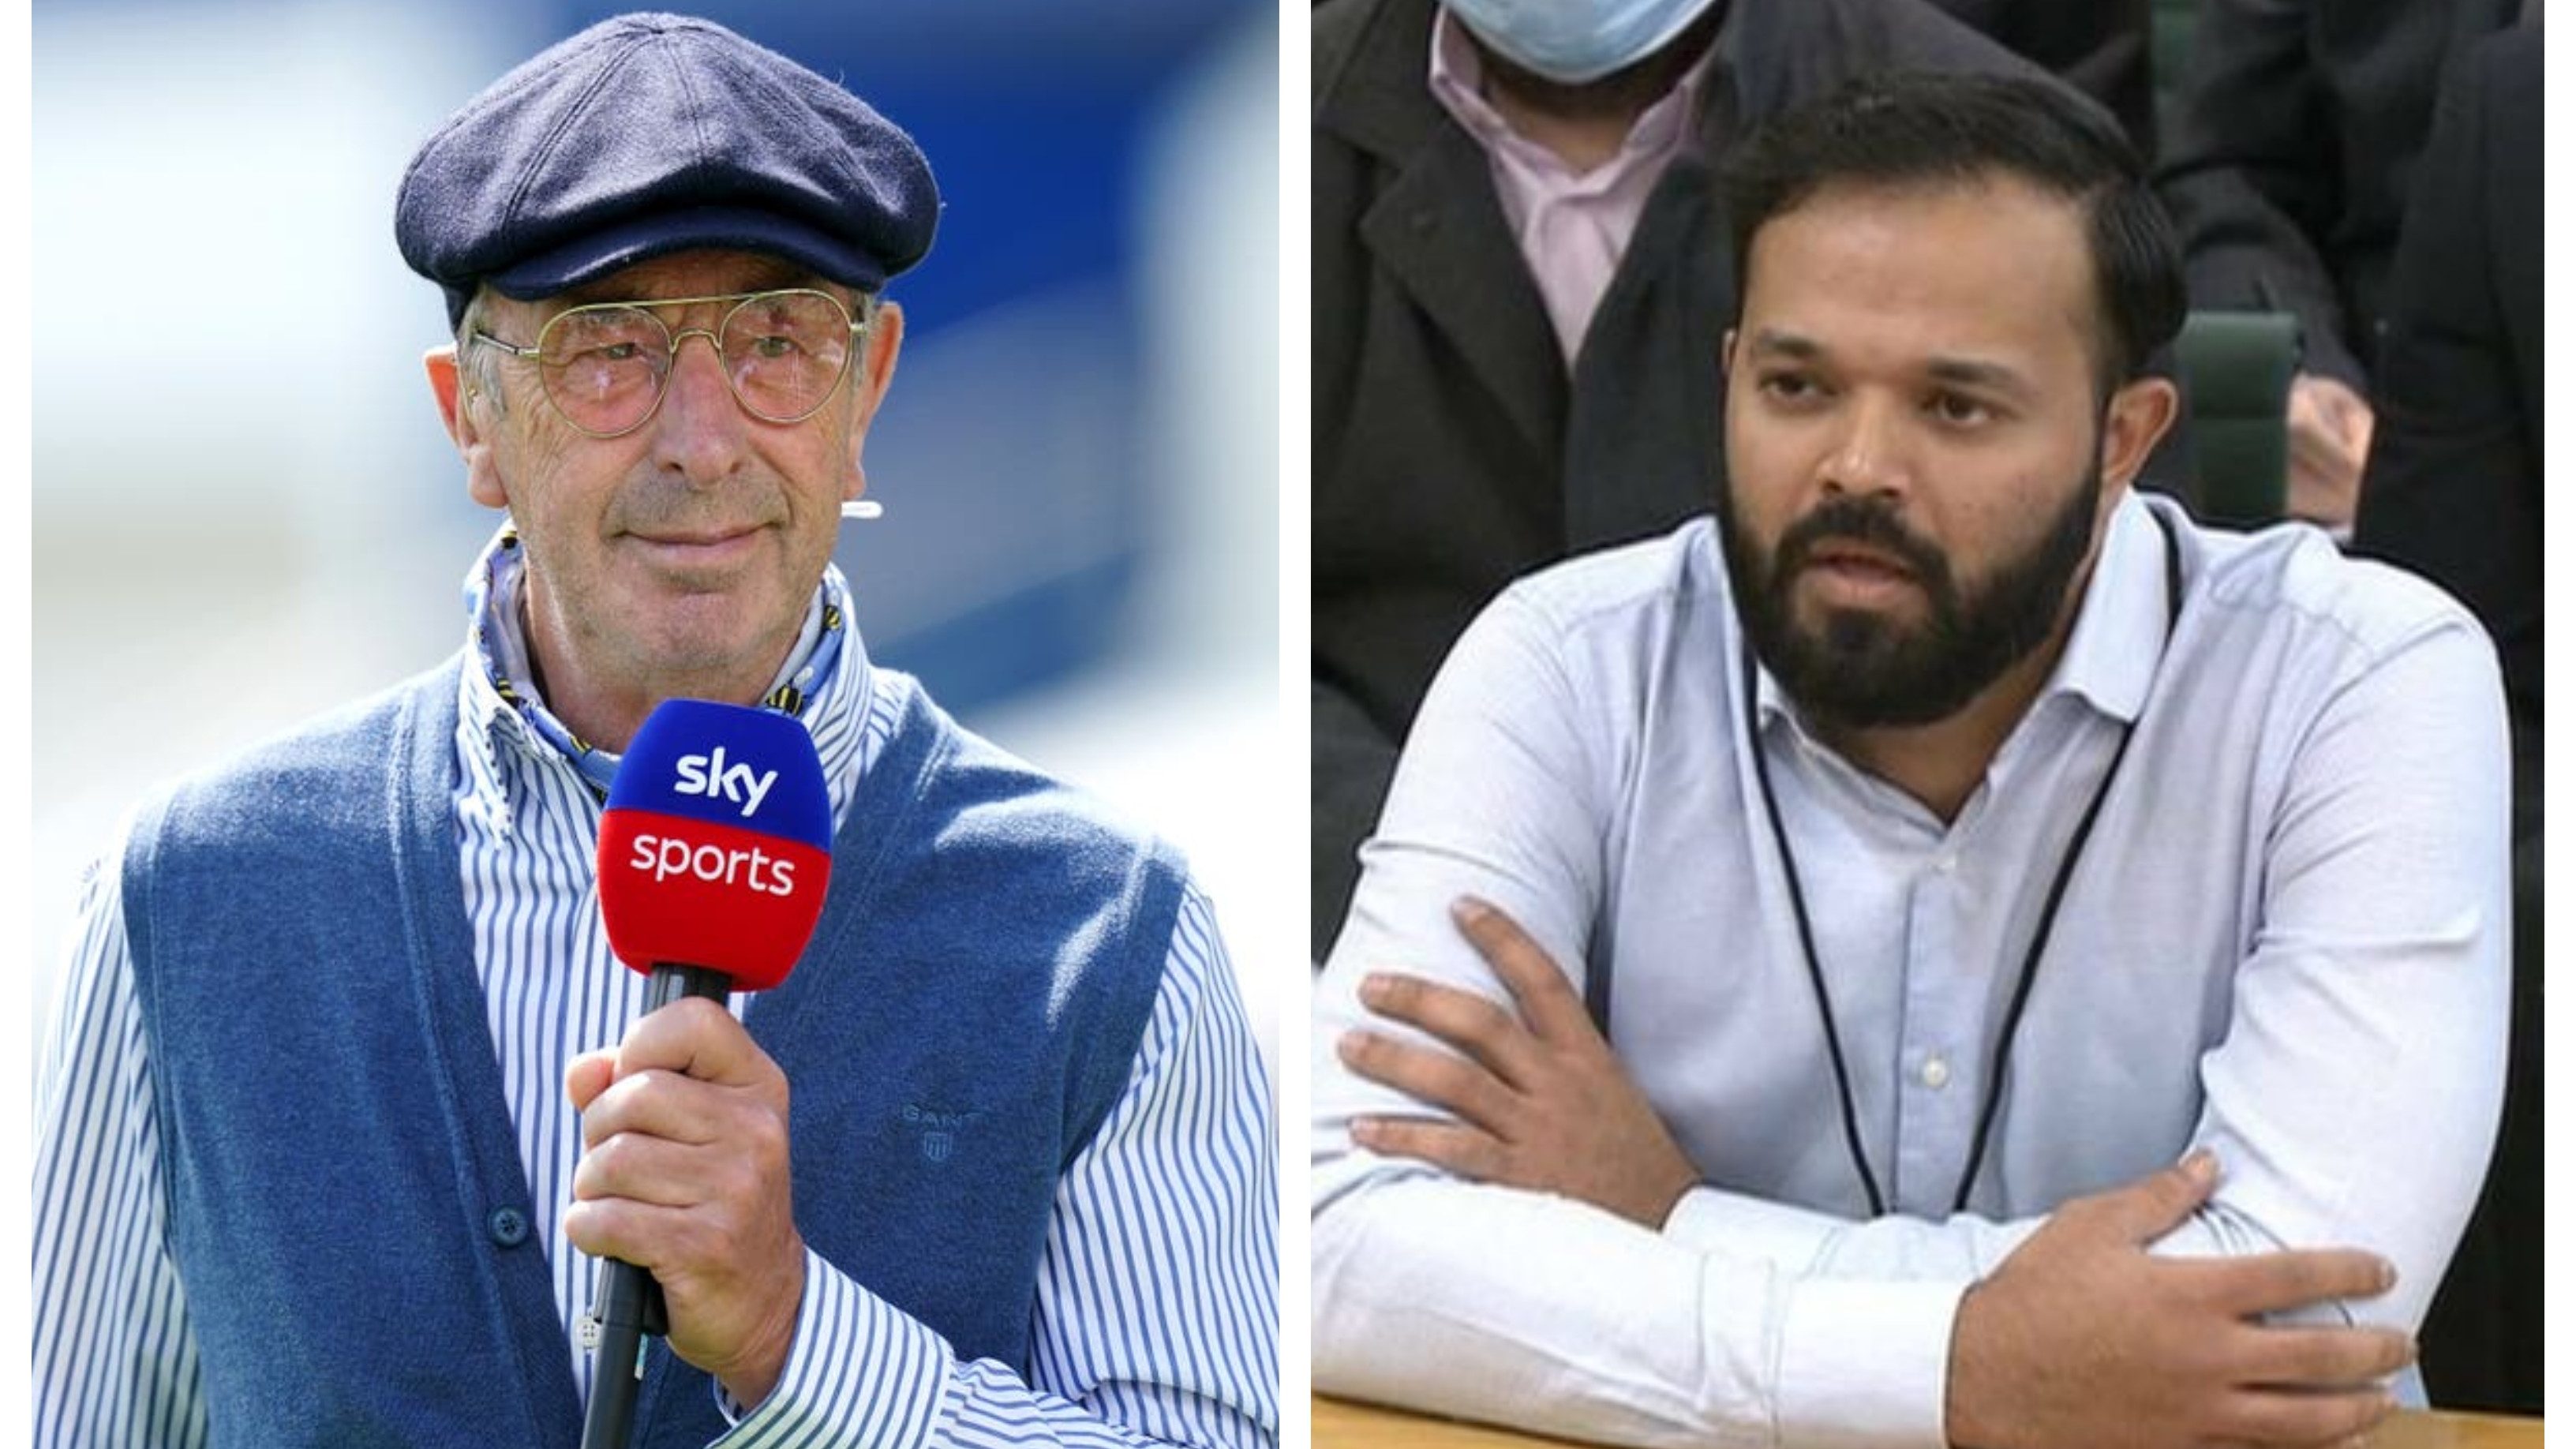 David Lloyd issues apology for his comments on Asian players after Azeem Rafiq’s testimony